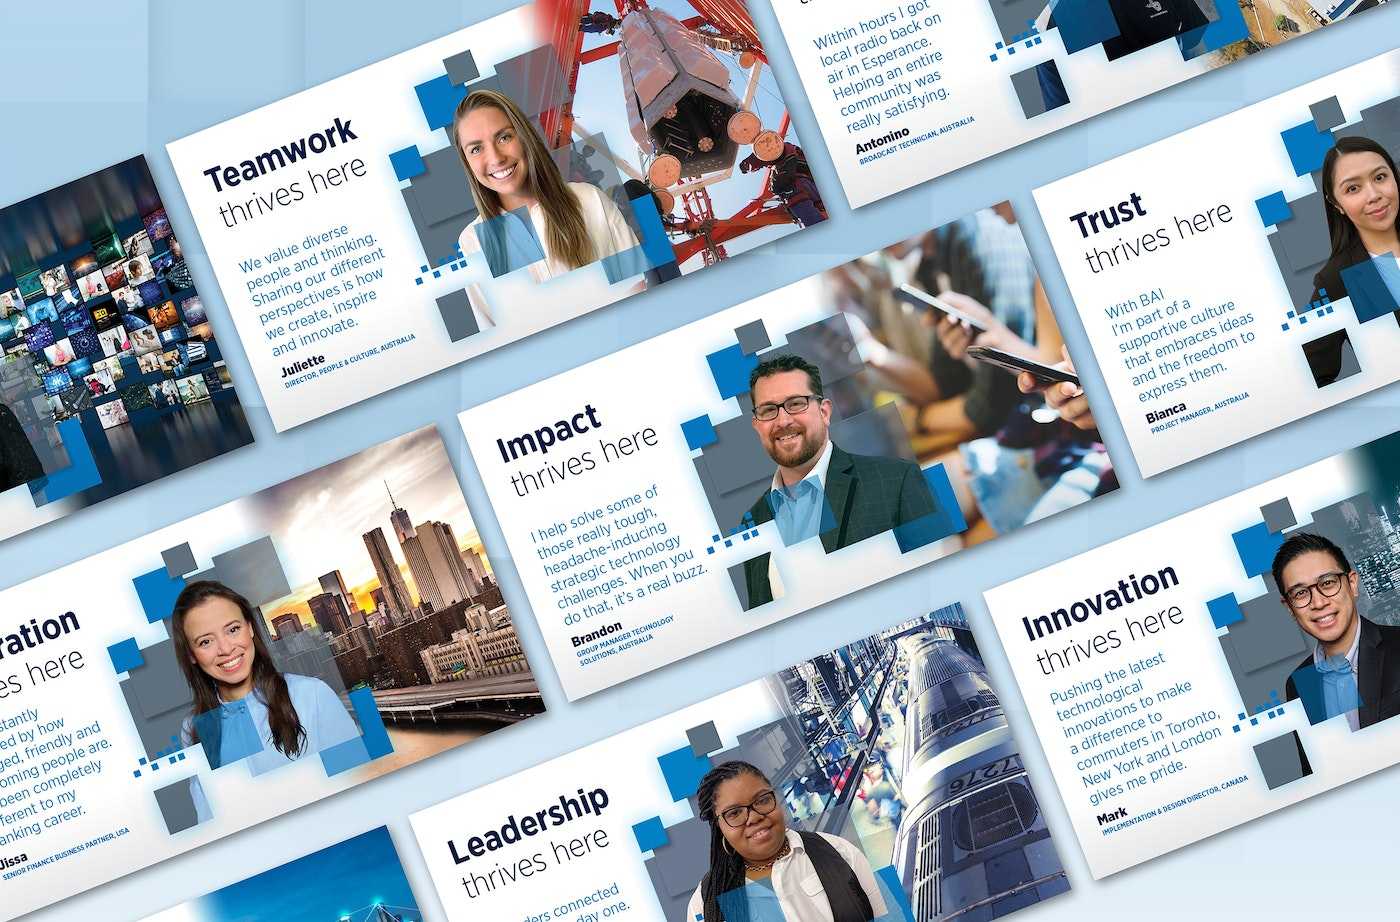 Collage of corporate professionals with inspiring quotes about teamwork, trust, impact, innovation, and leadership | Belong Creative